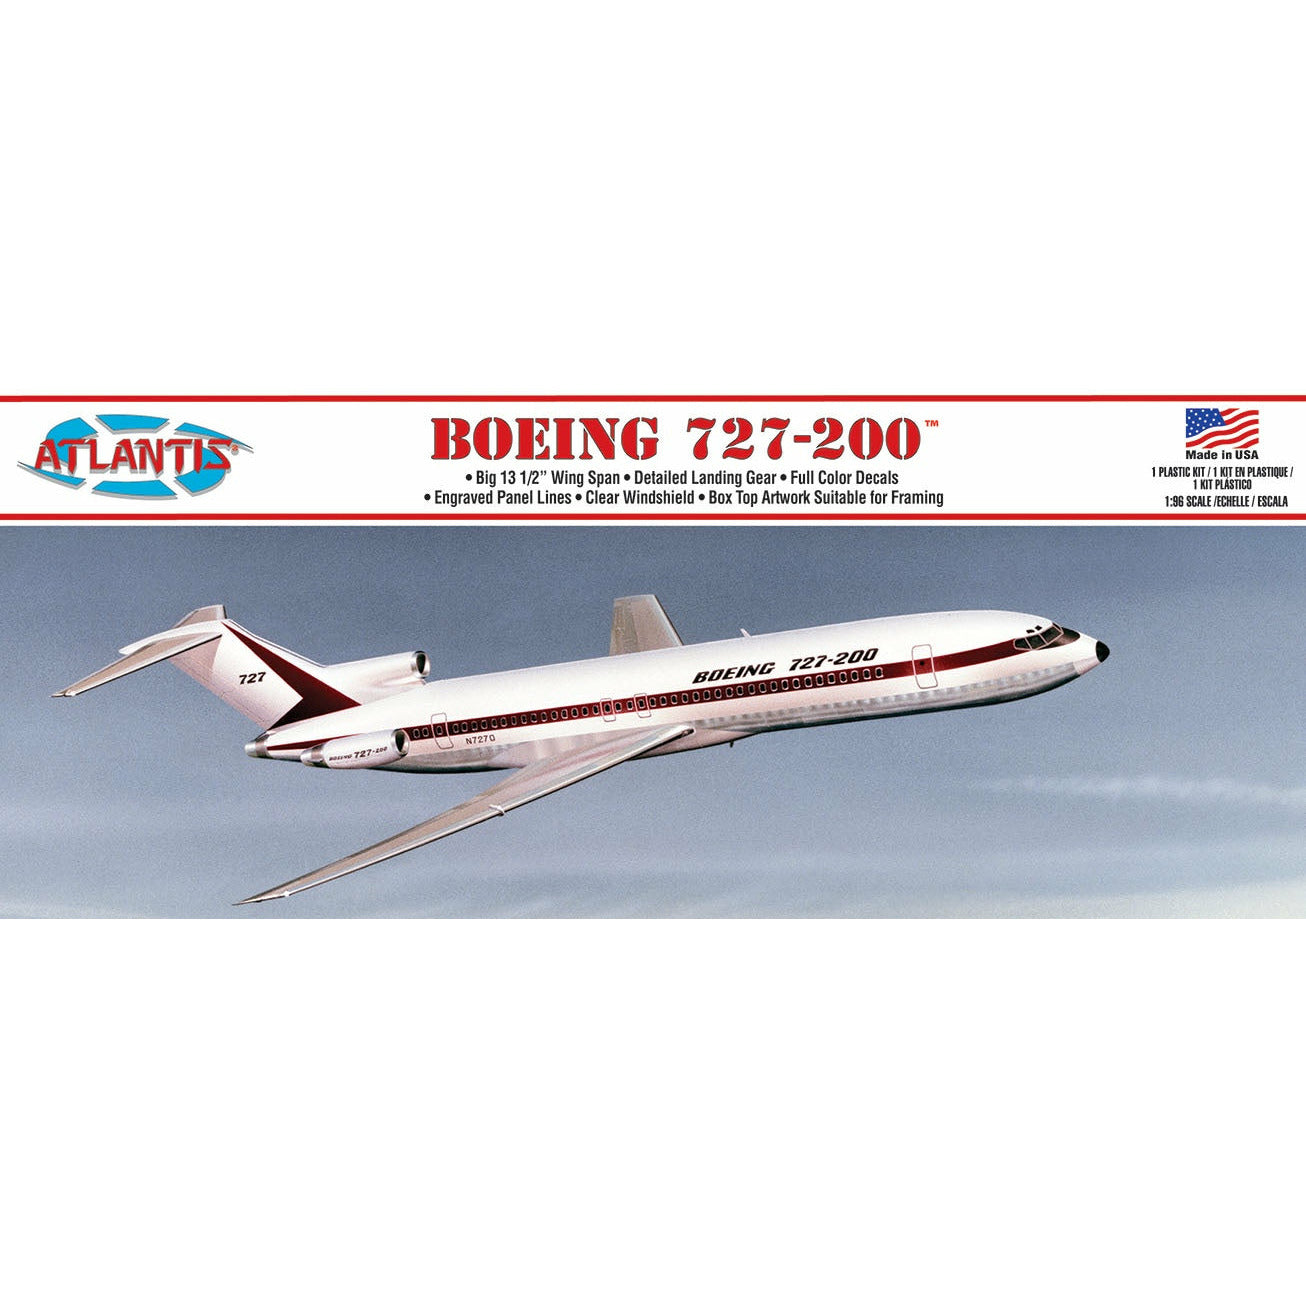 Boeing 727-200 1/96 #A6005 by Atlantis